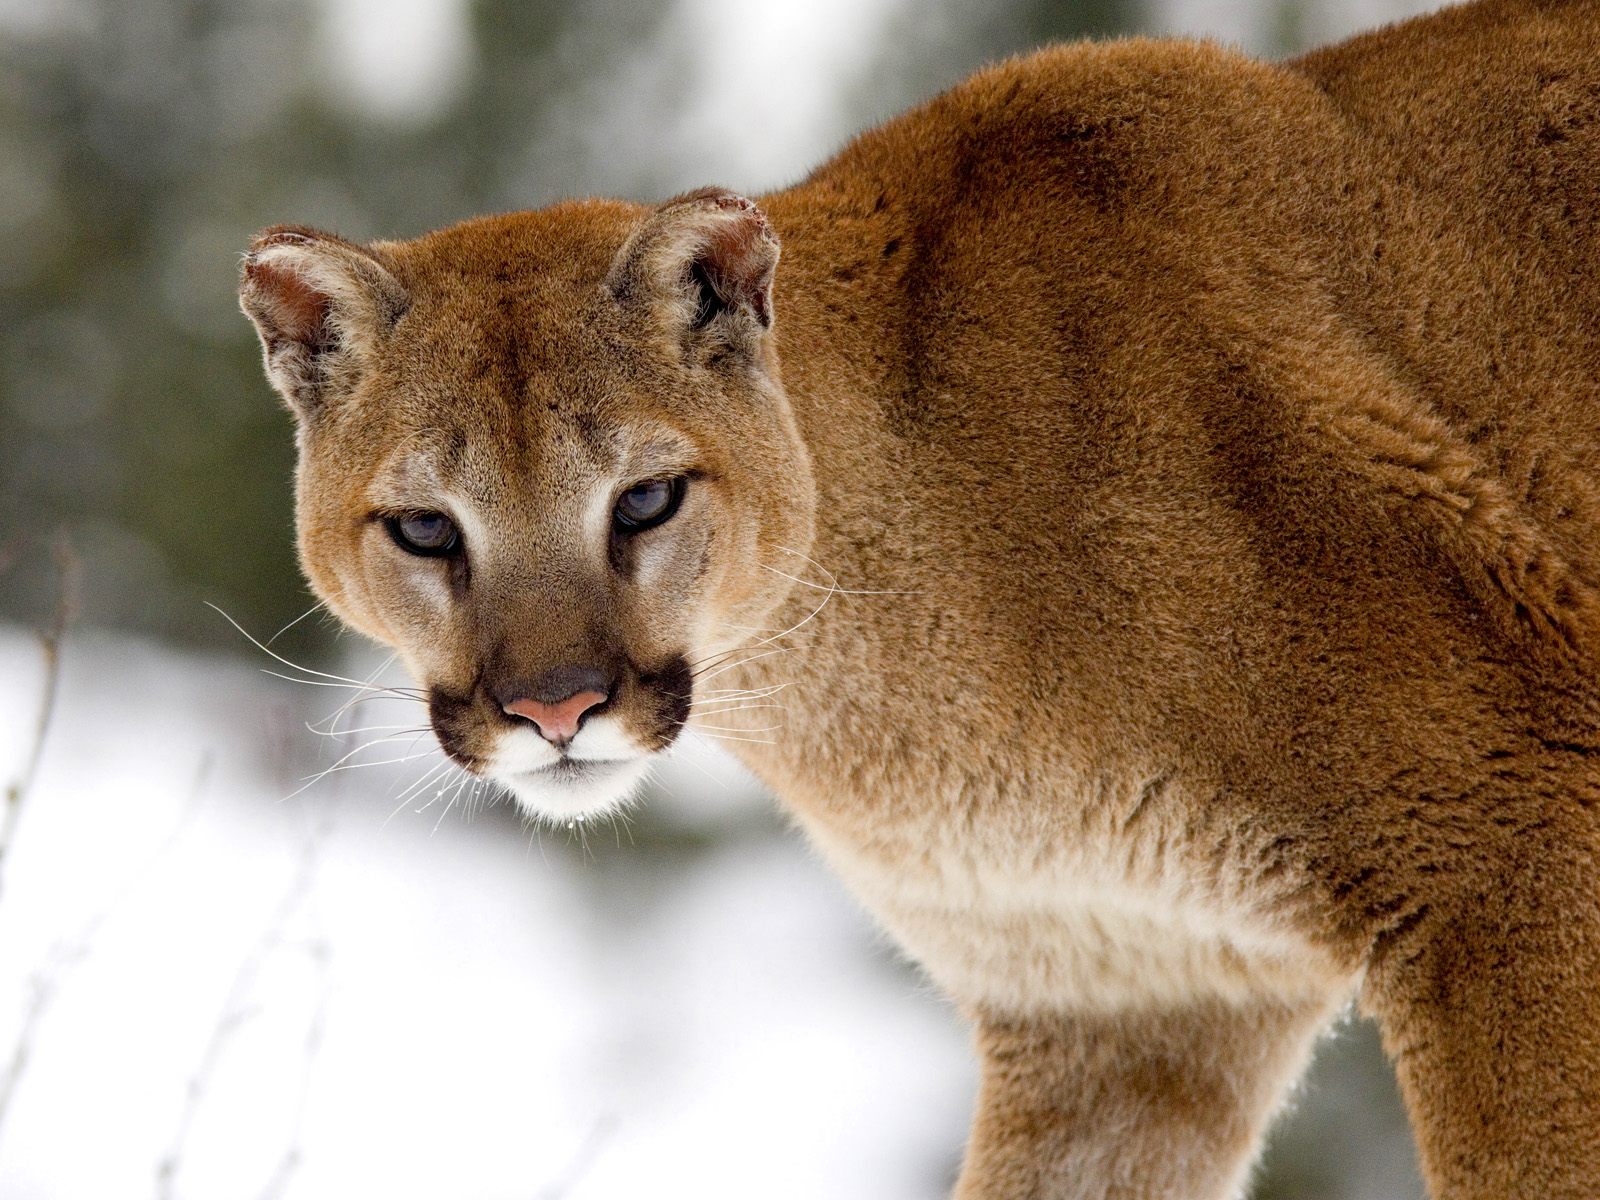 Description of Animal: The head of the cat is around. The ears stand up straight. Cougars have powerful forequarters, neck, and jaw that helps